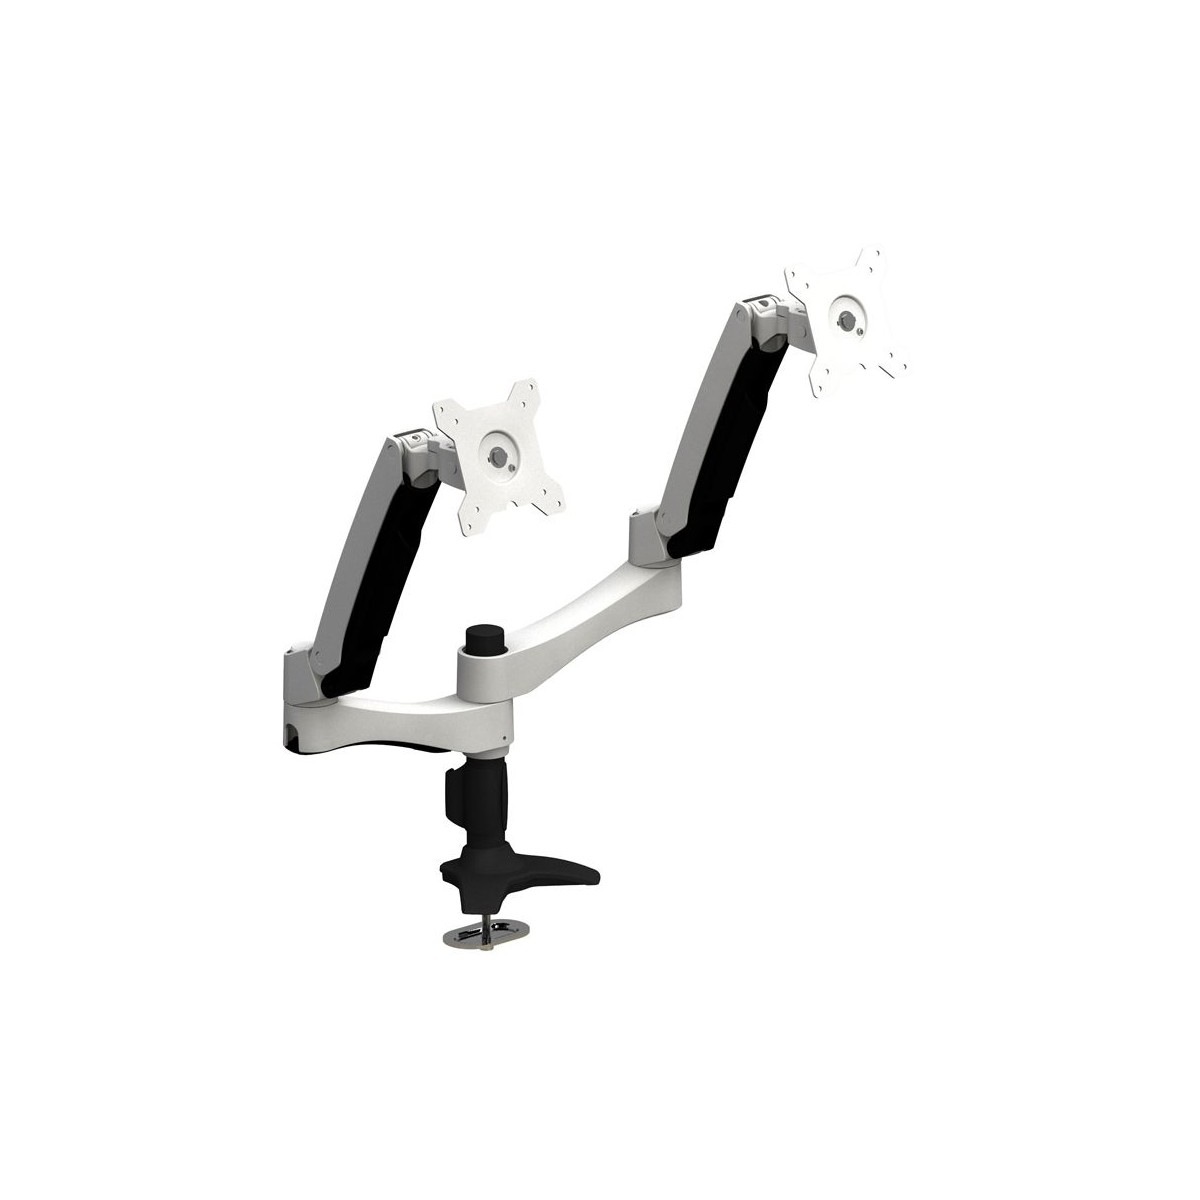 Aavara AI742 Free Style Dual Monitor Stand - Grommnet base with 5 Pivot